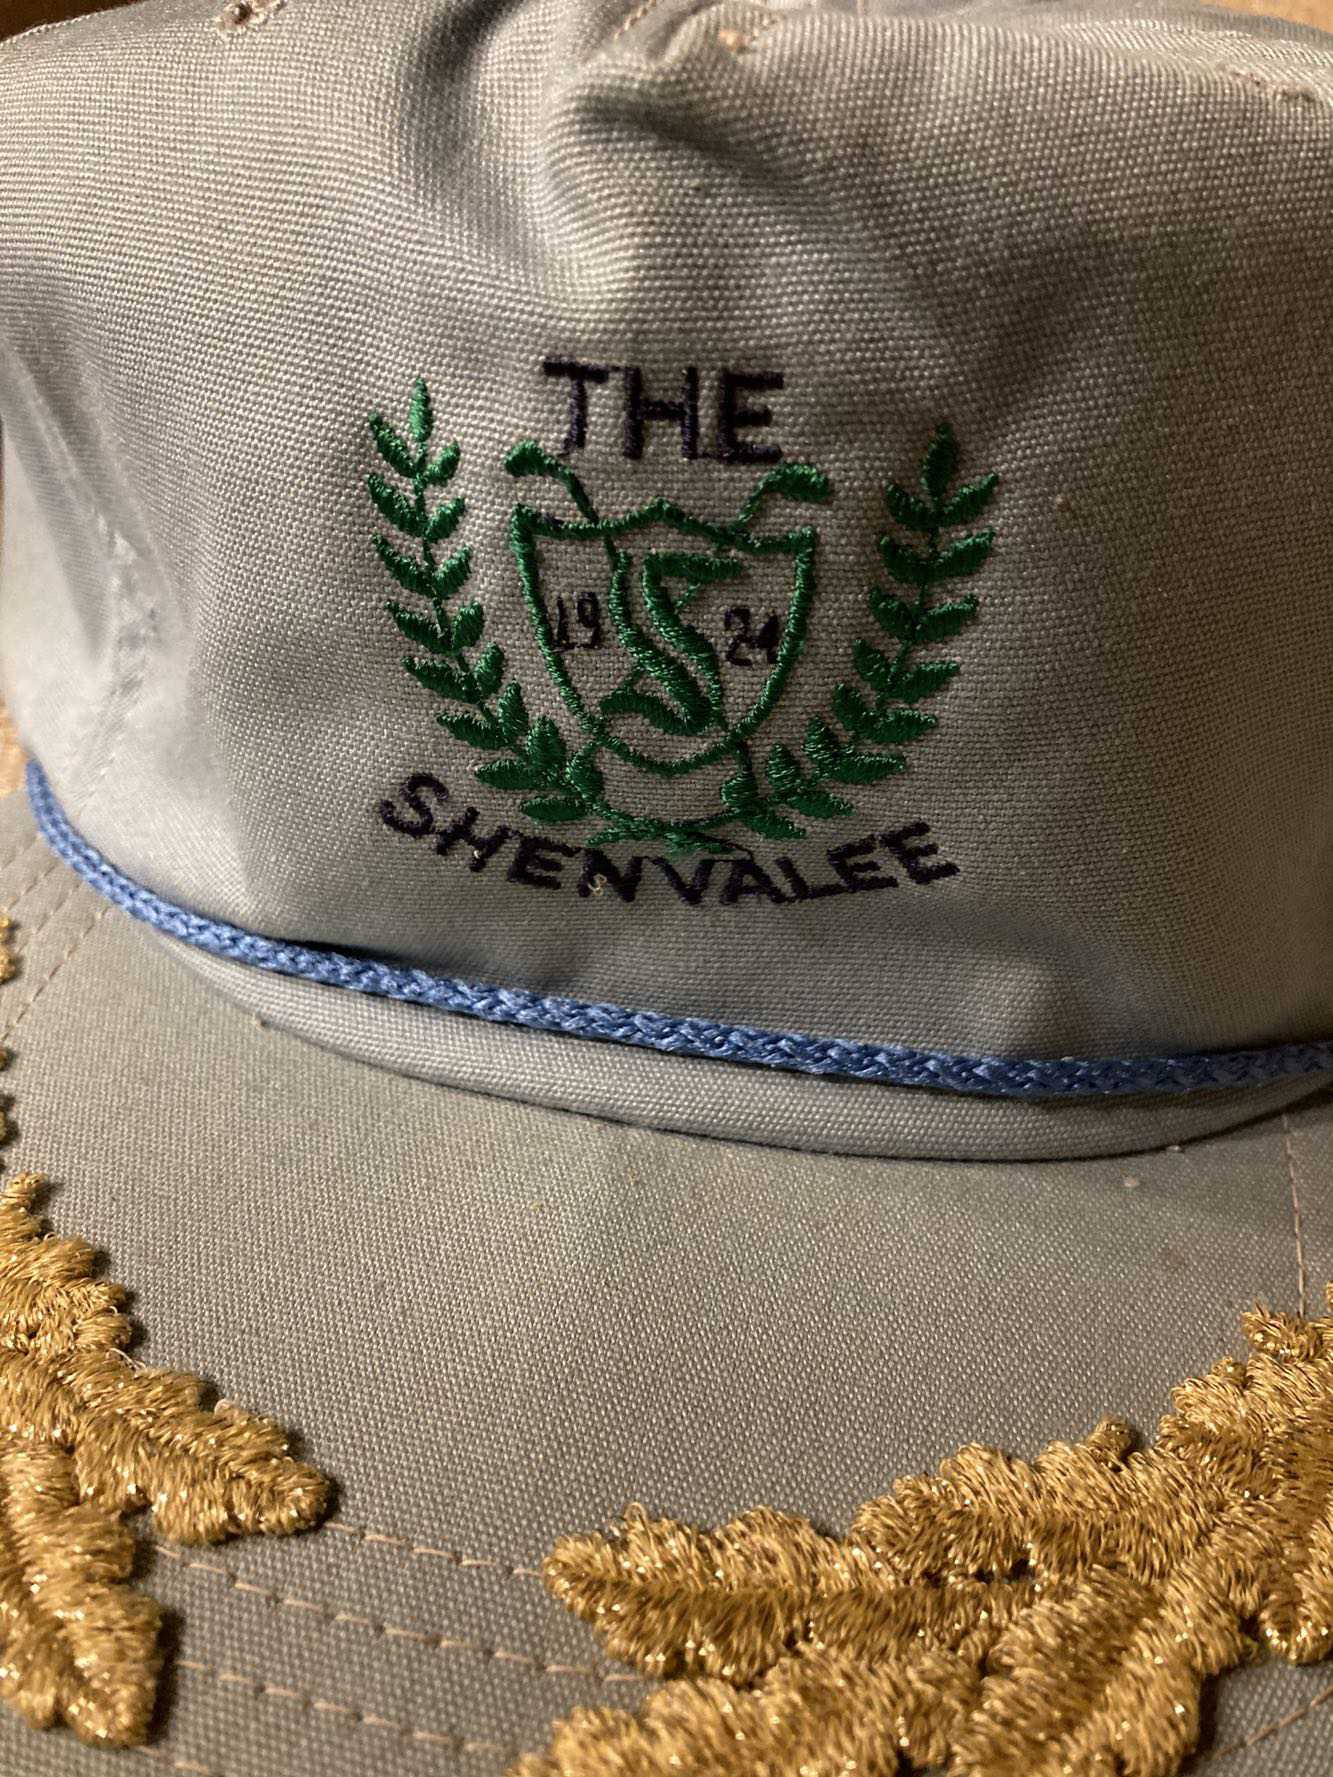 The Shenvalee